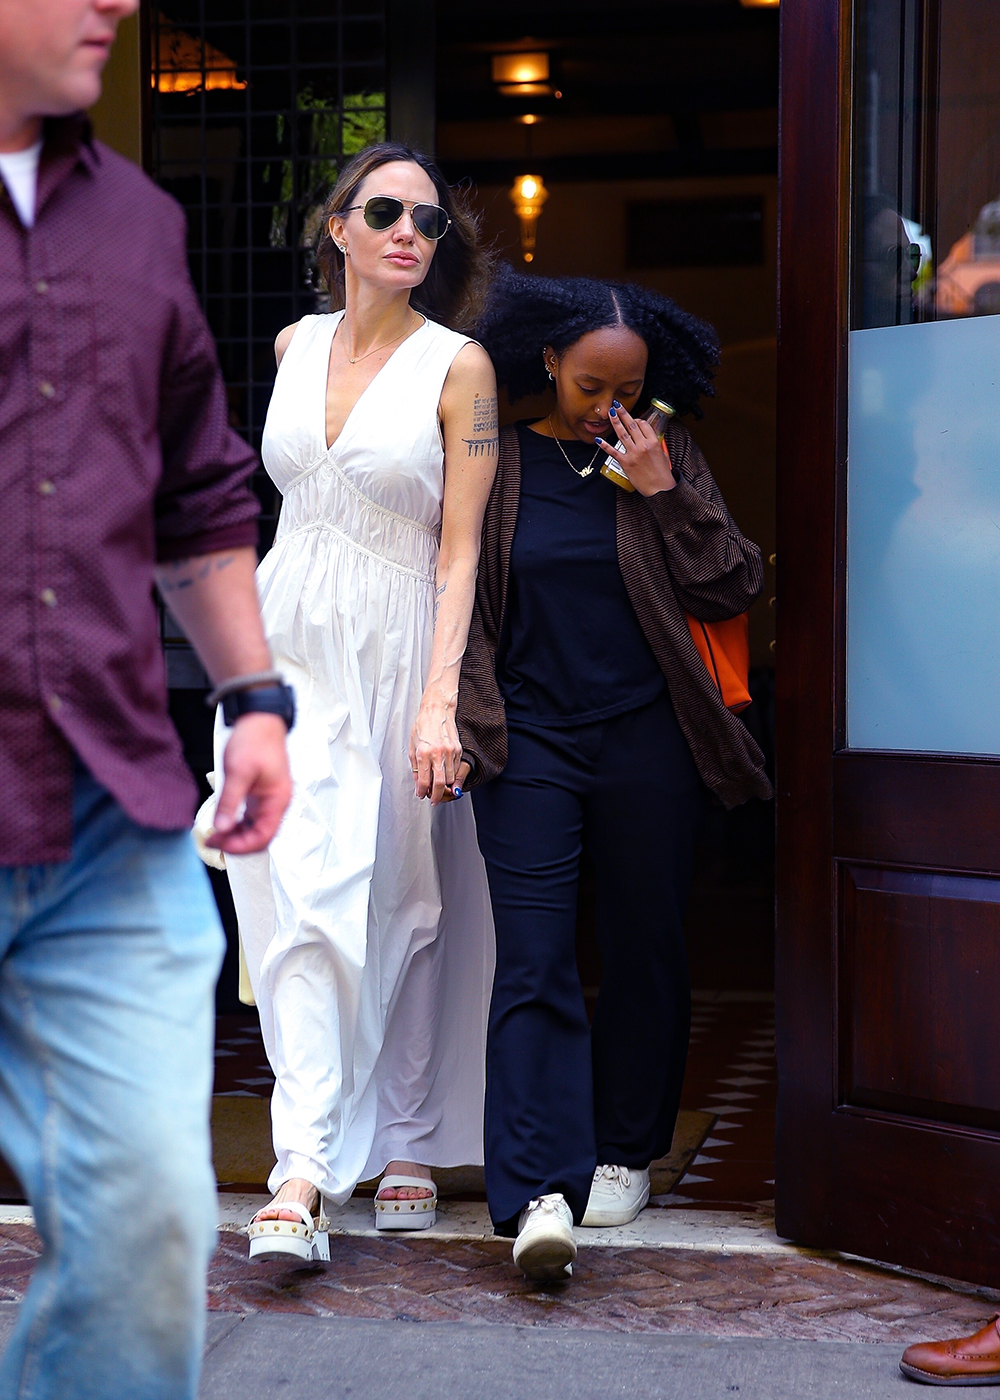 Cost-Savvy Angelina Jolie shops for sparkling water with daughter